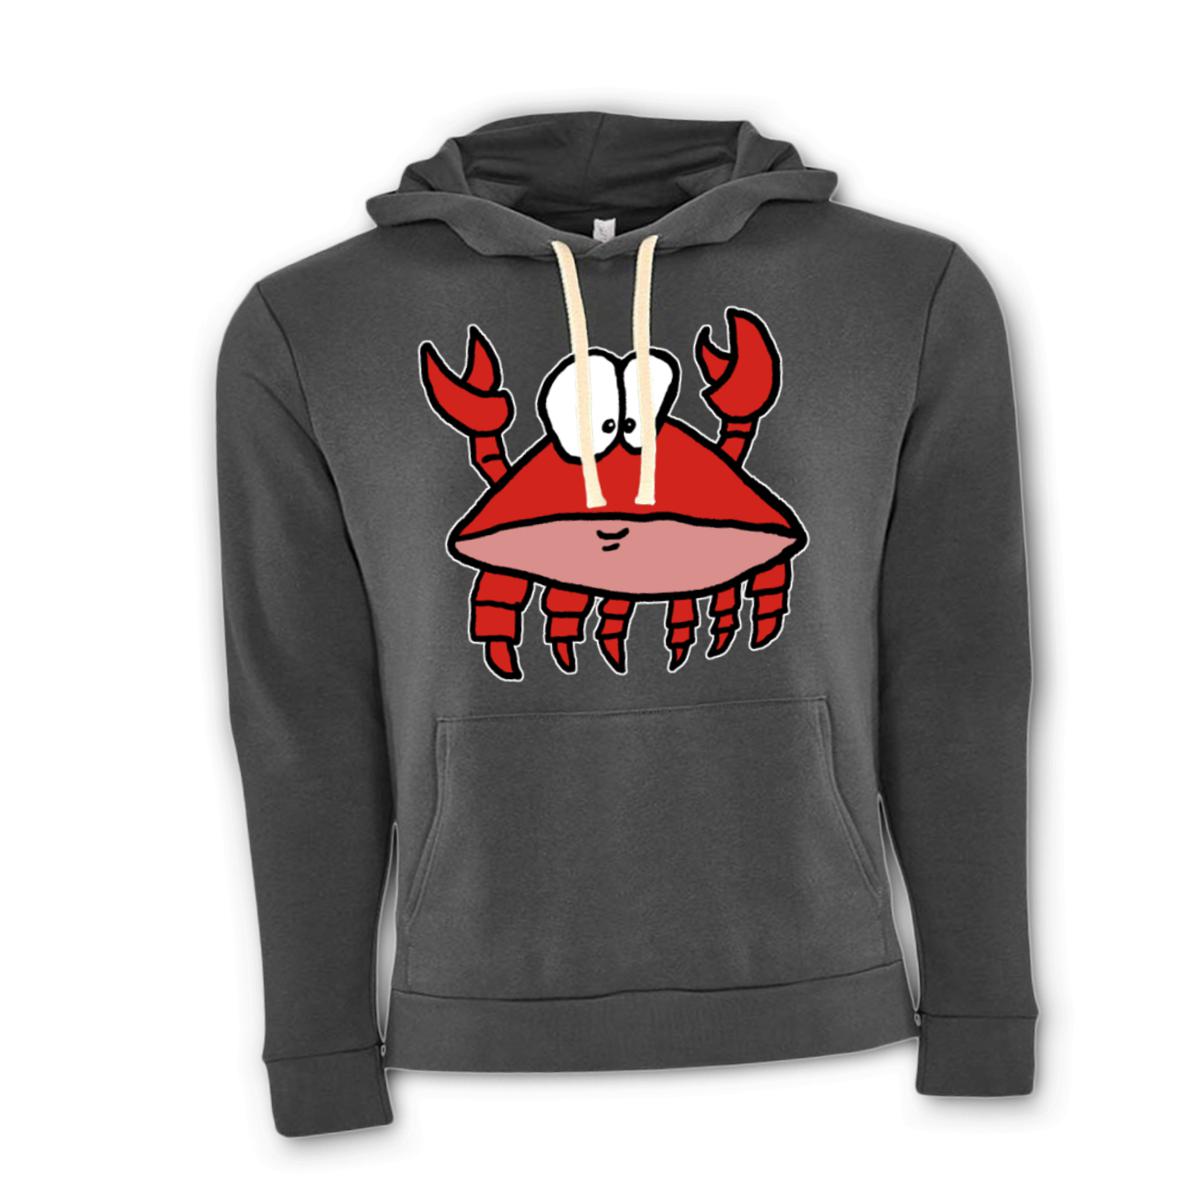 Crab 2.0 Unisex Pullover Hoodie Small heavy-metal